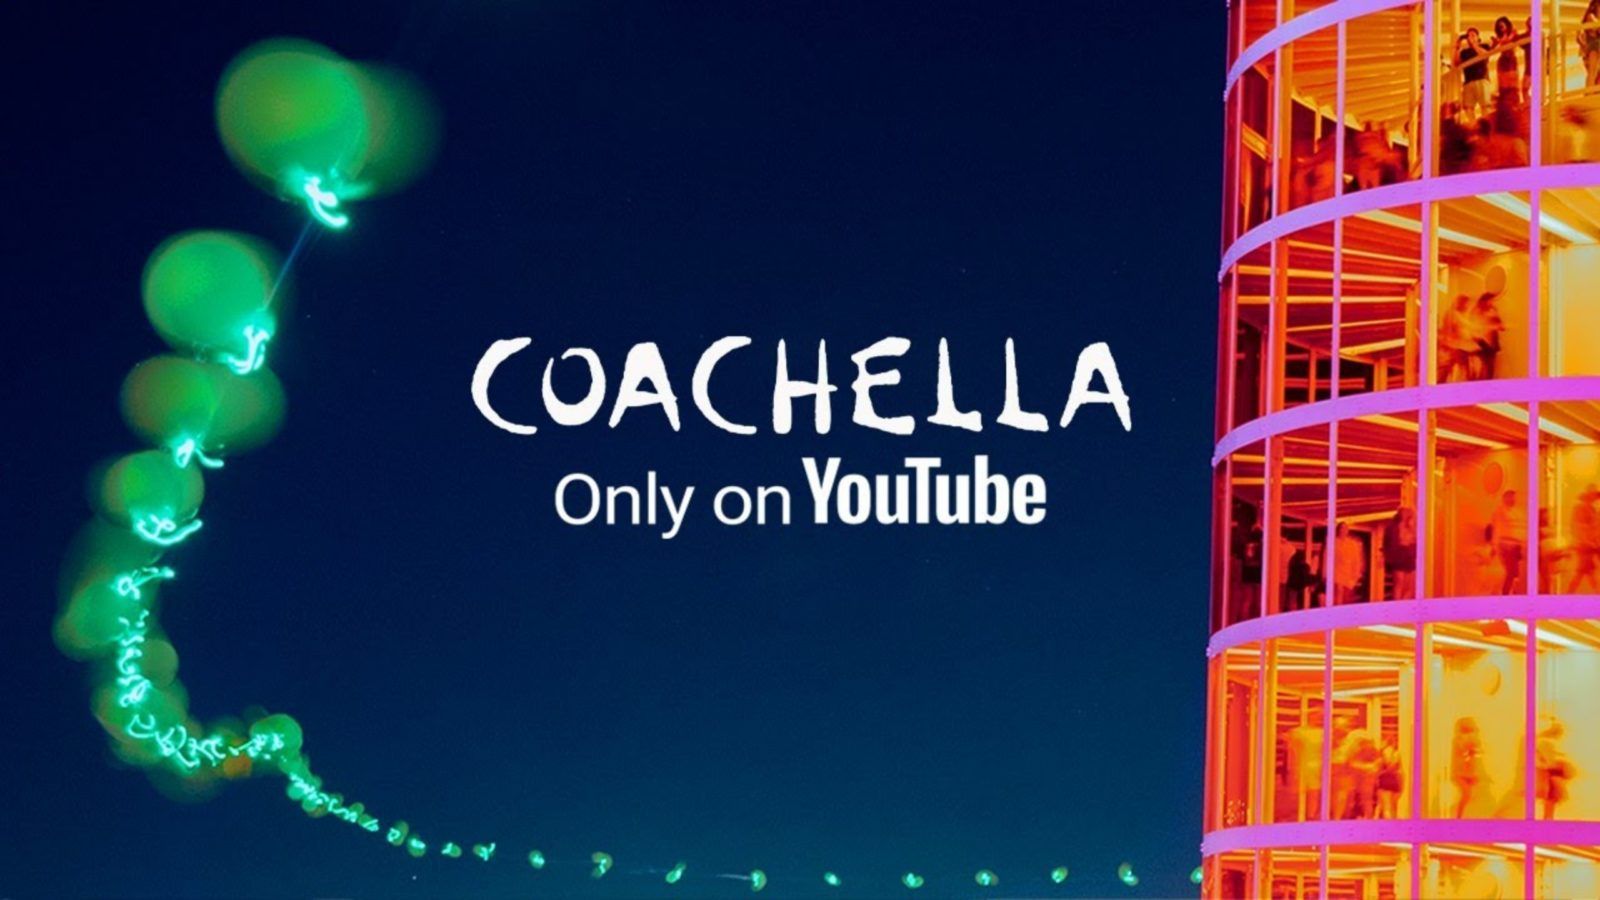 Coachella is back! Here’s how to experience the best of 2022’s festival online